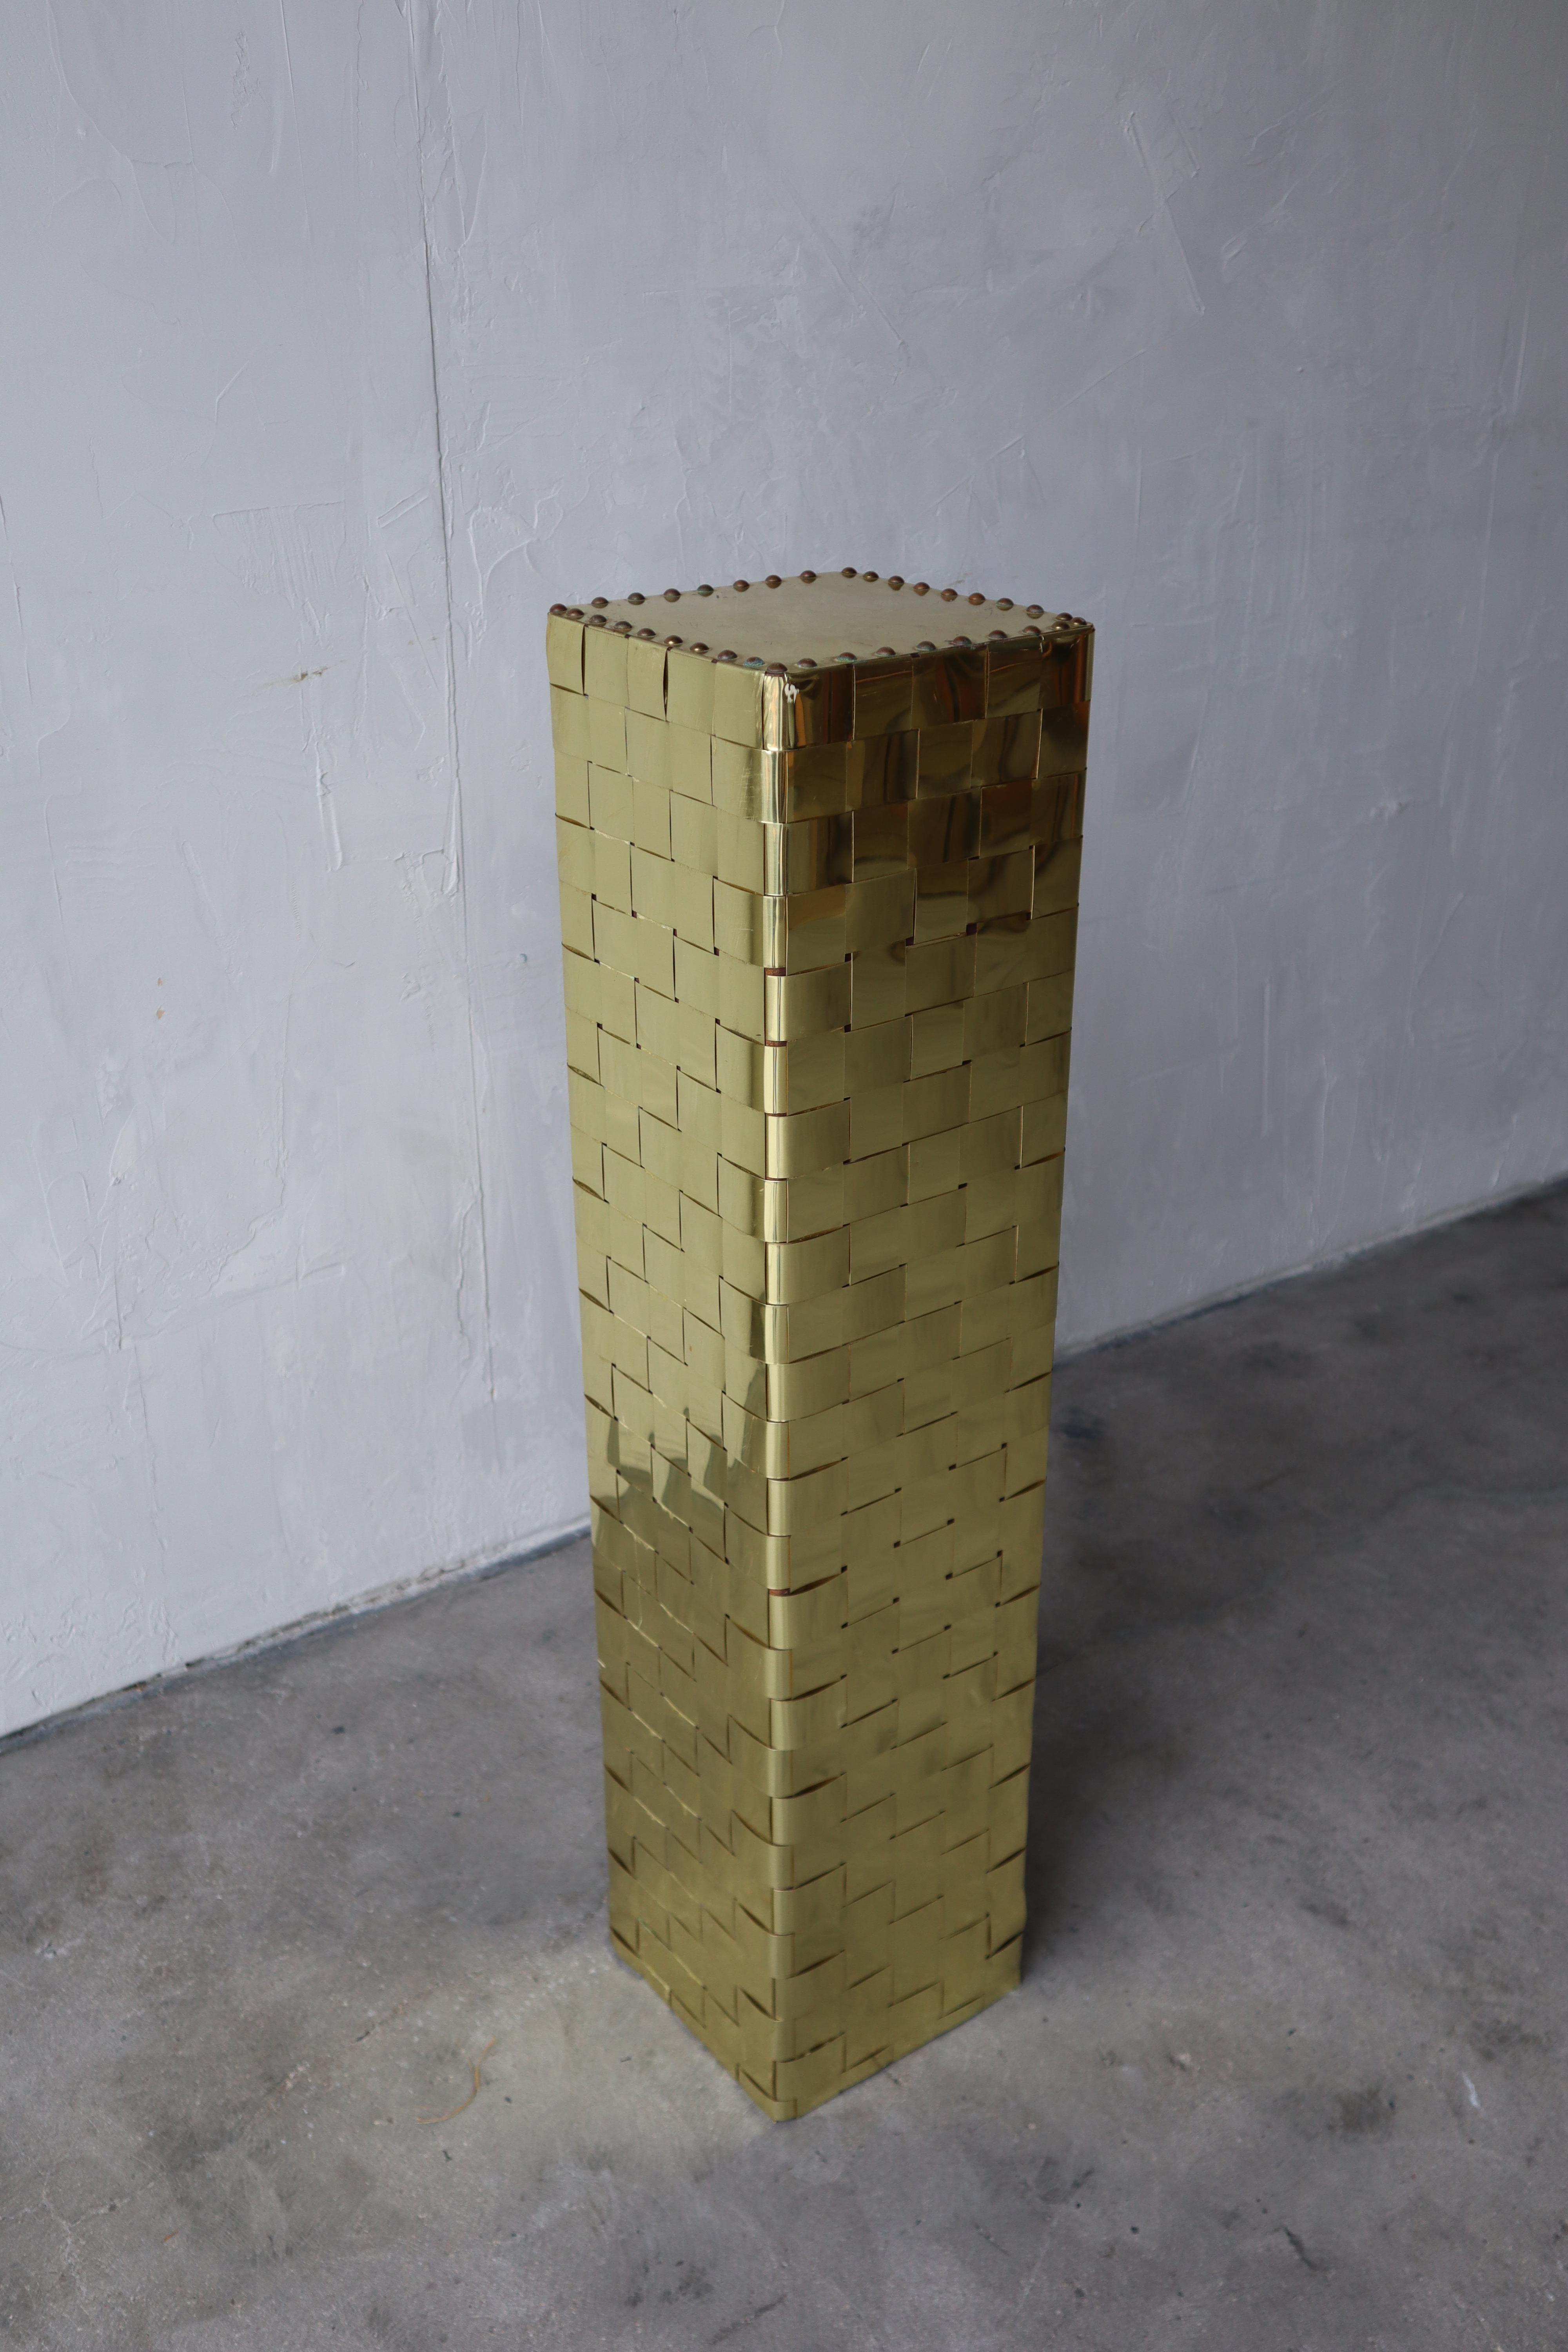 Unique pedestal, made of woven brass straps and studs.

There are some areas of minor patina, as to be expected with brass, but overall in great condition.